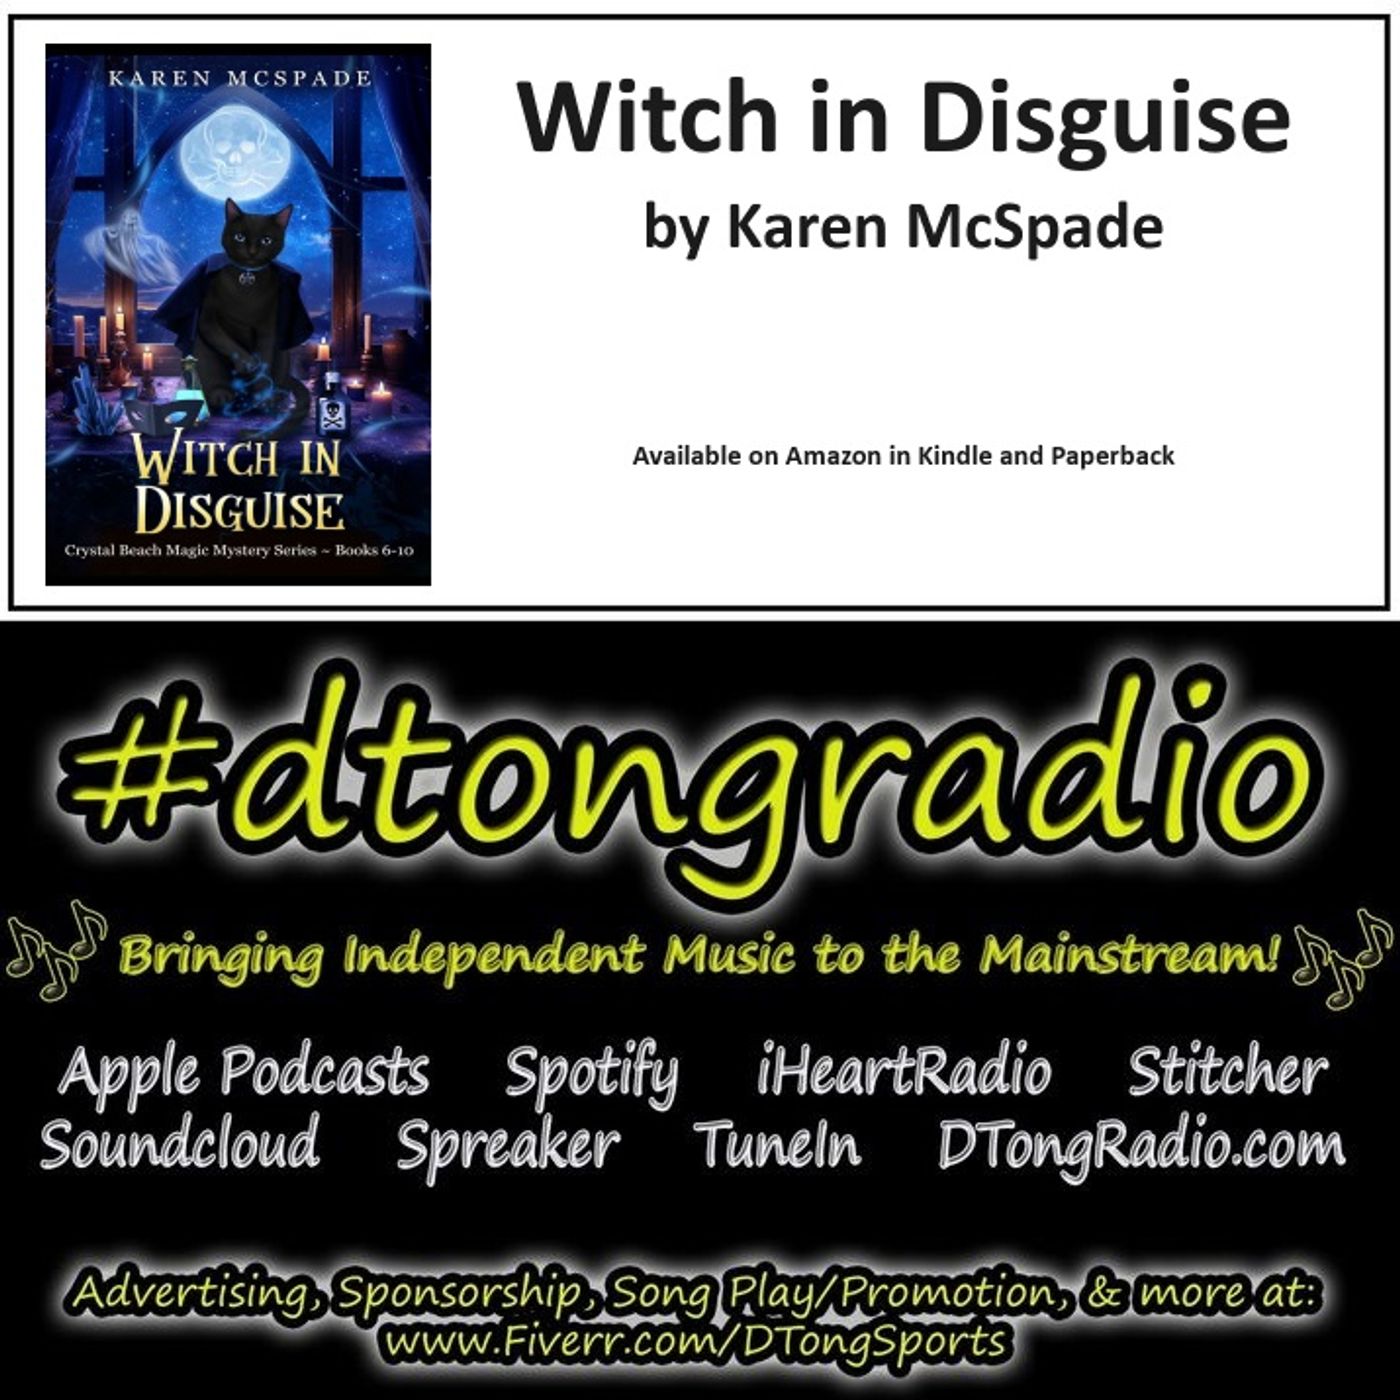 All Independent Music Weekend Showcase - Powered by 'A Witch In Disguise' by Karen McSpade